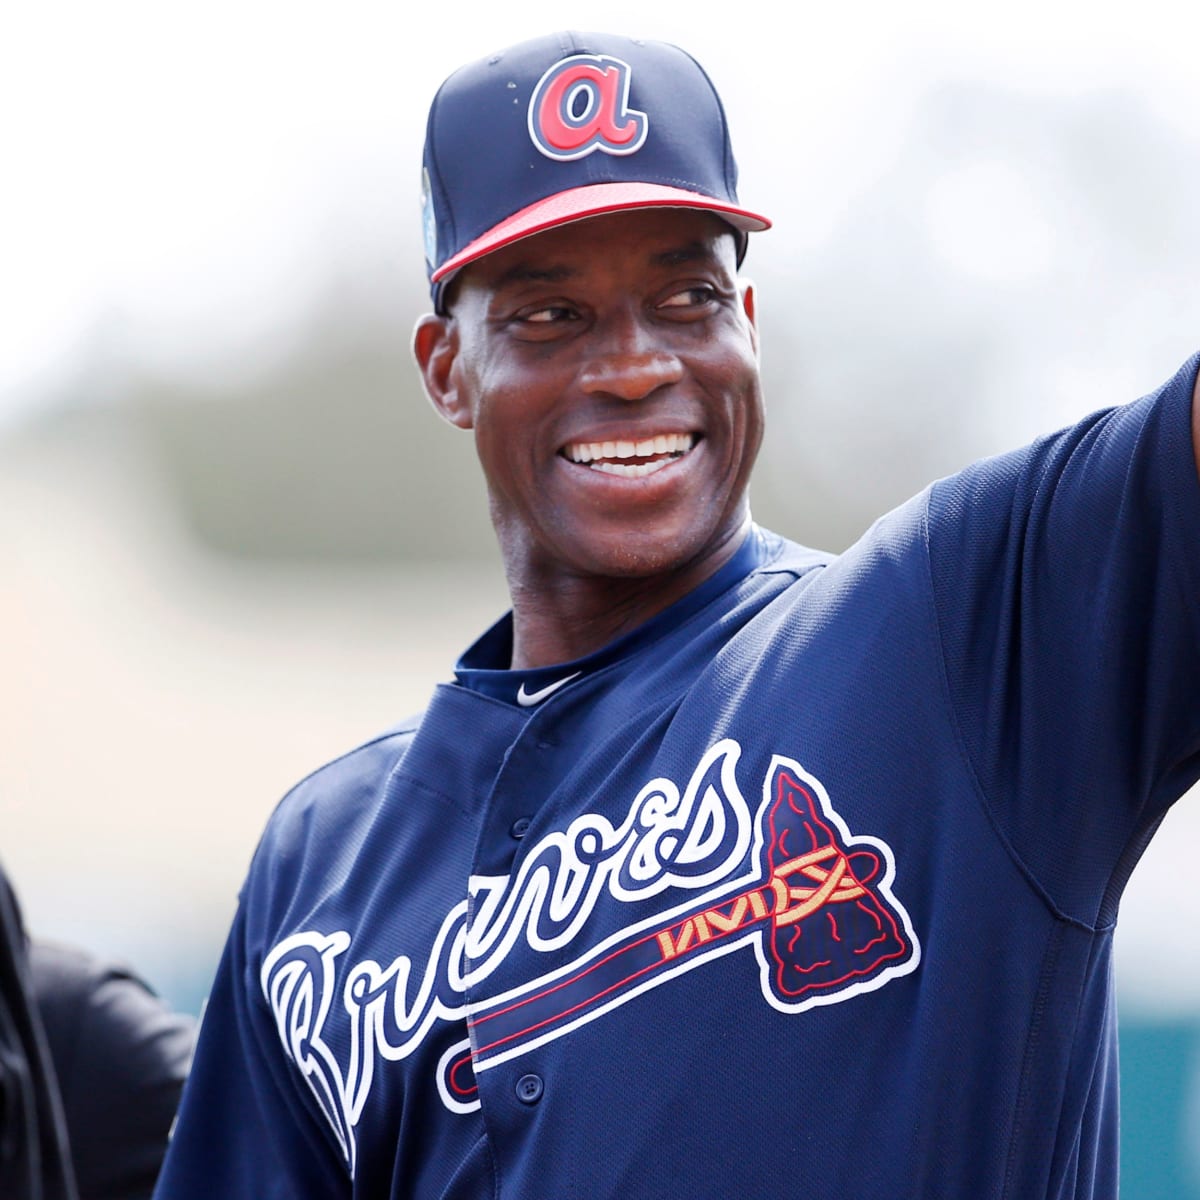 Fred McGriff Elected to MLB Hall of Fame - ESPN 98.1 FM - 850 AM WRUF